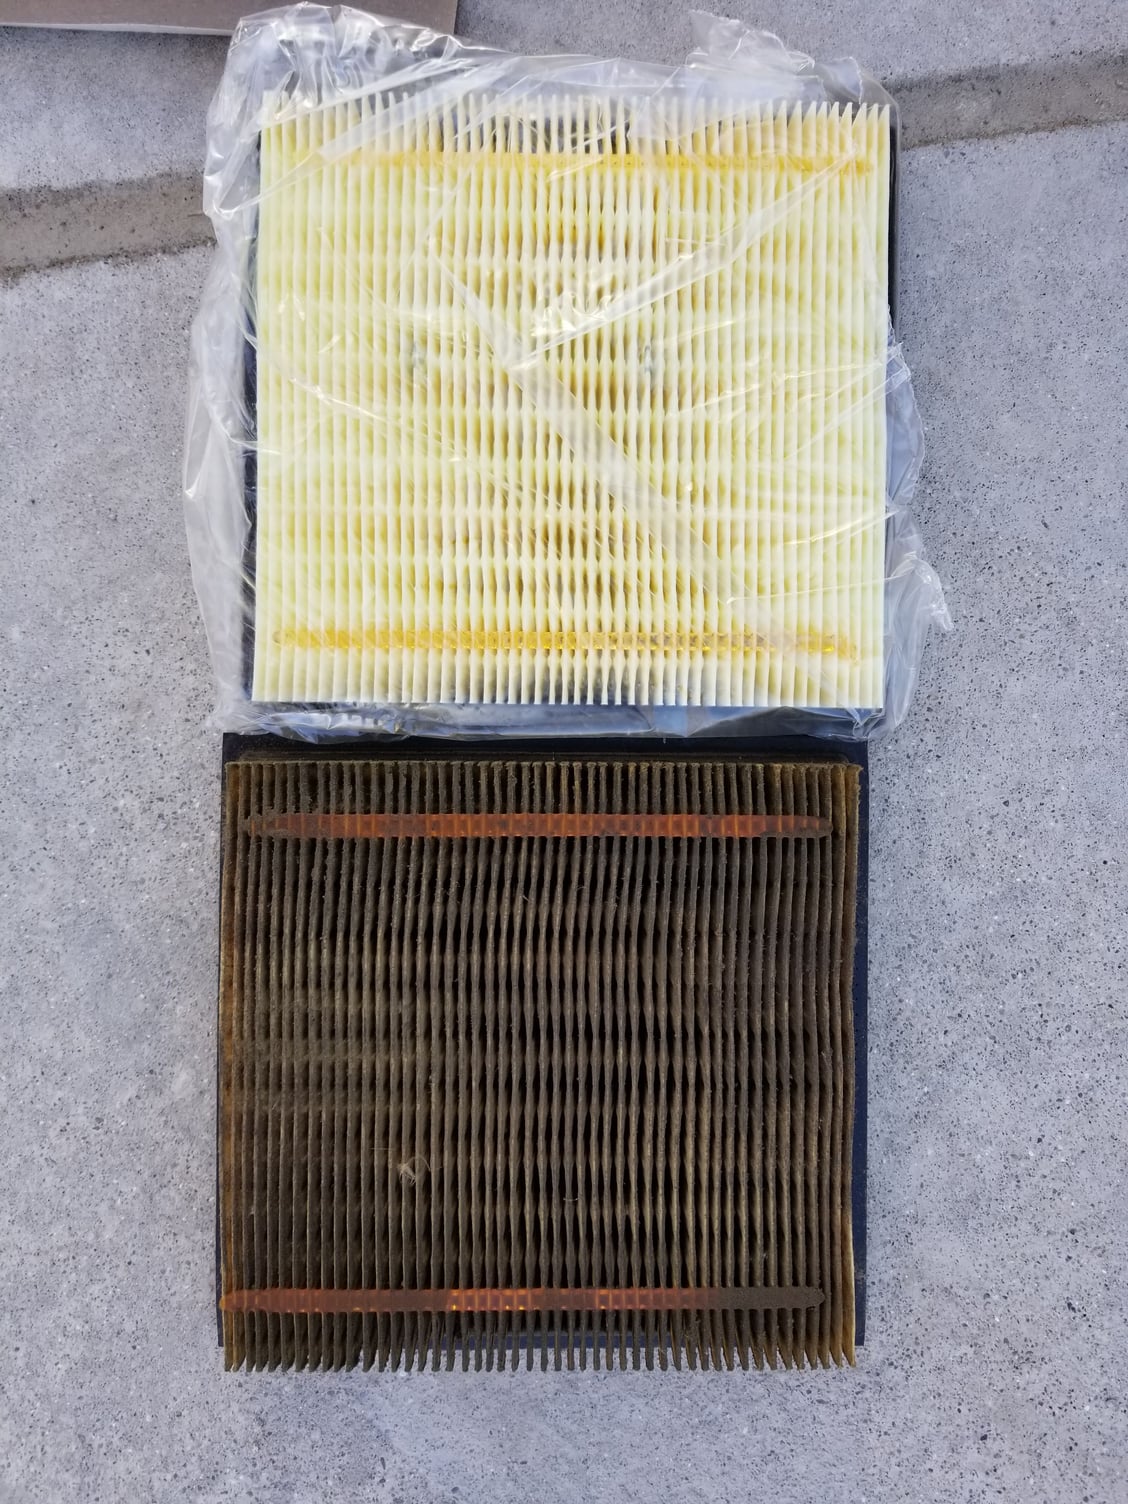 Is there anyway to know if my K and N air filter is a dry filter or and  oiled filter. Mine is super dirty and i want to clean it but I'm